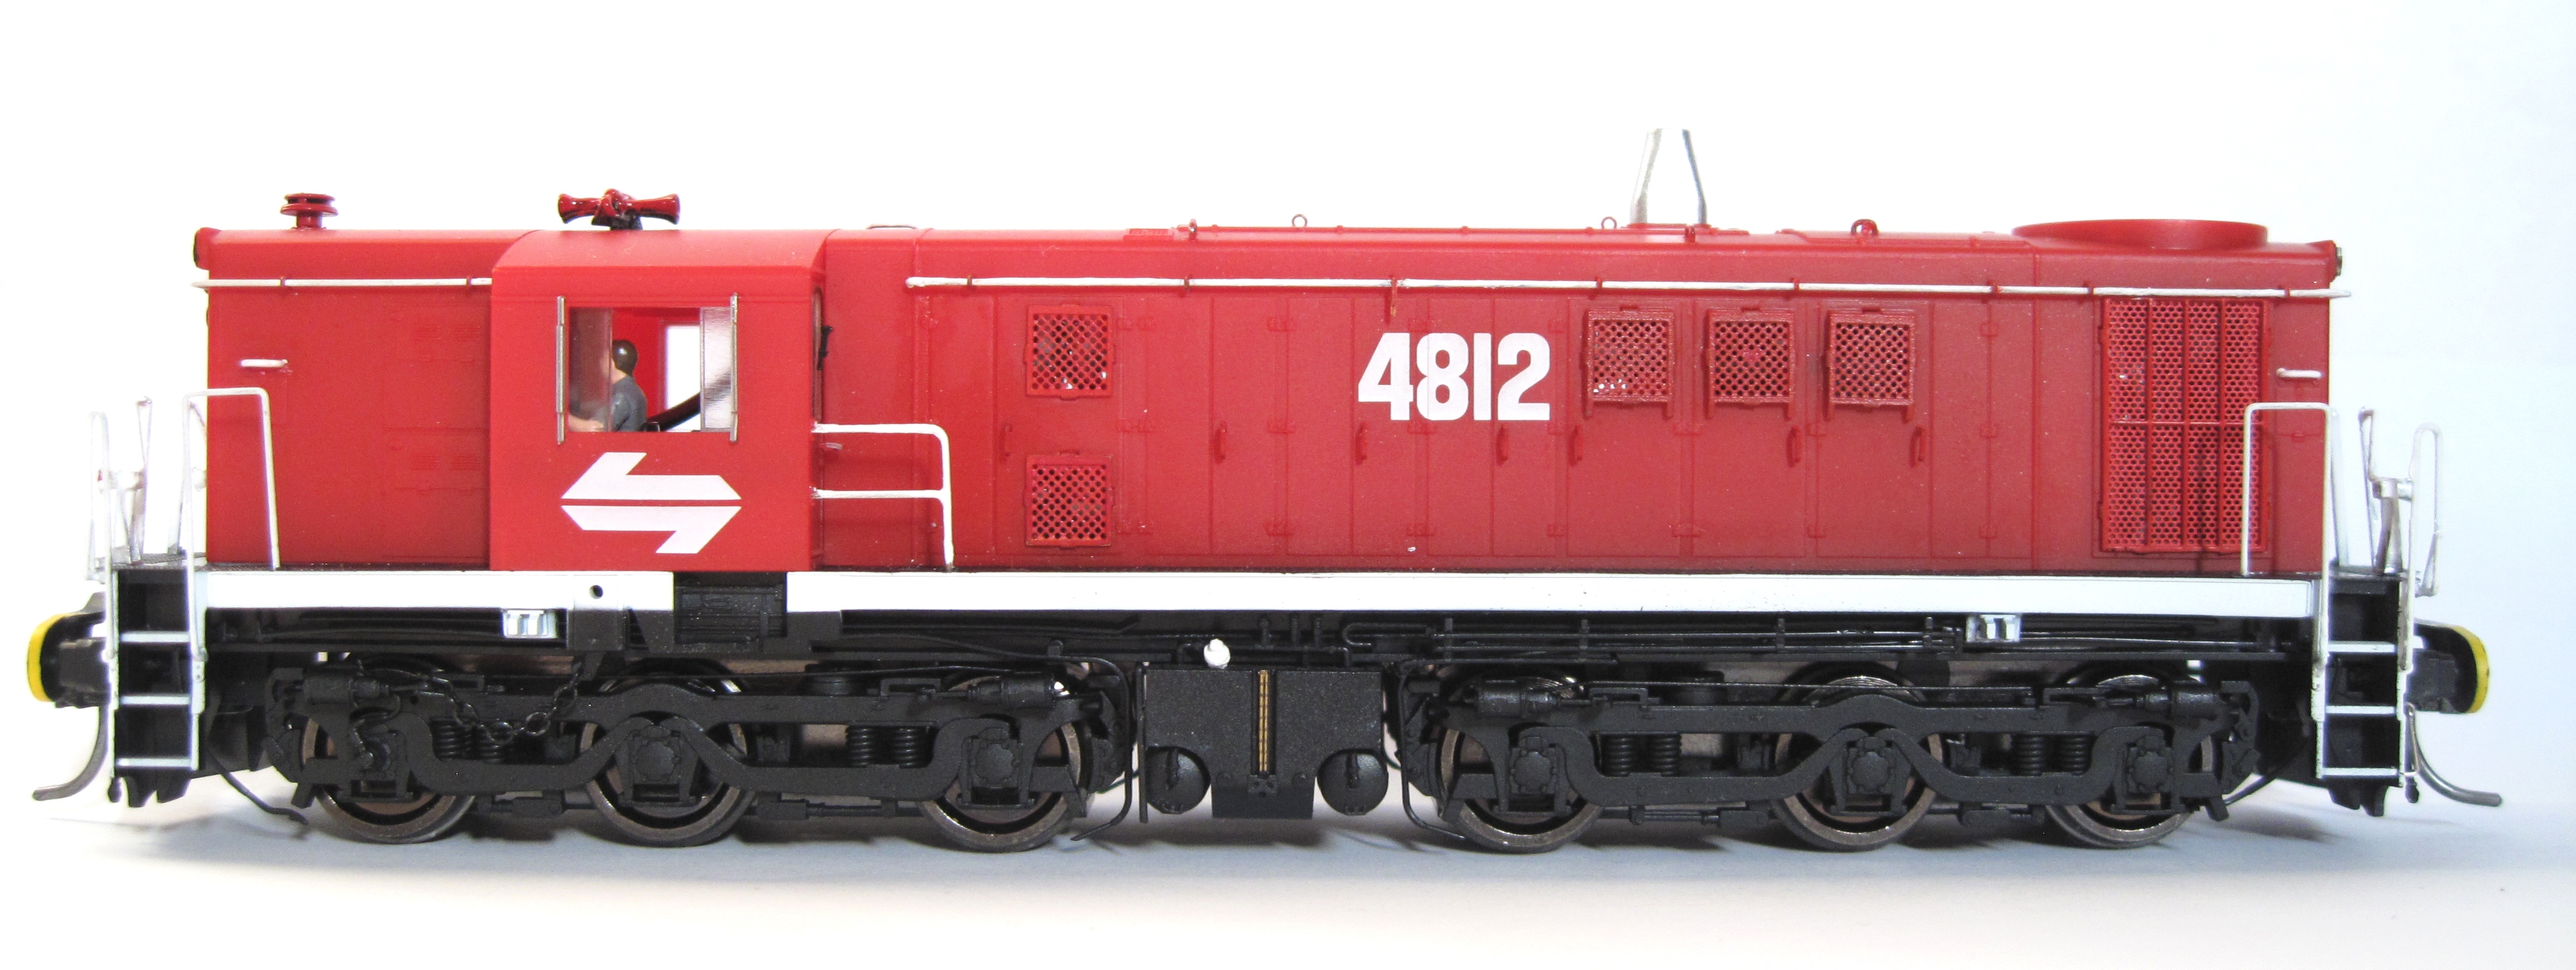 END OF THE FINANCIAL YEAR SALE, 48 CLASS (4812 RED TERROR), PRICE REDUCED TO $265